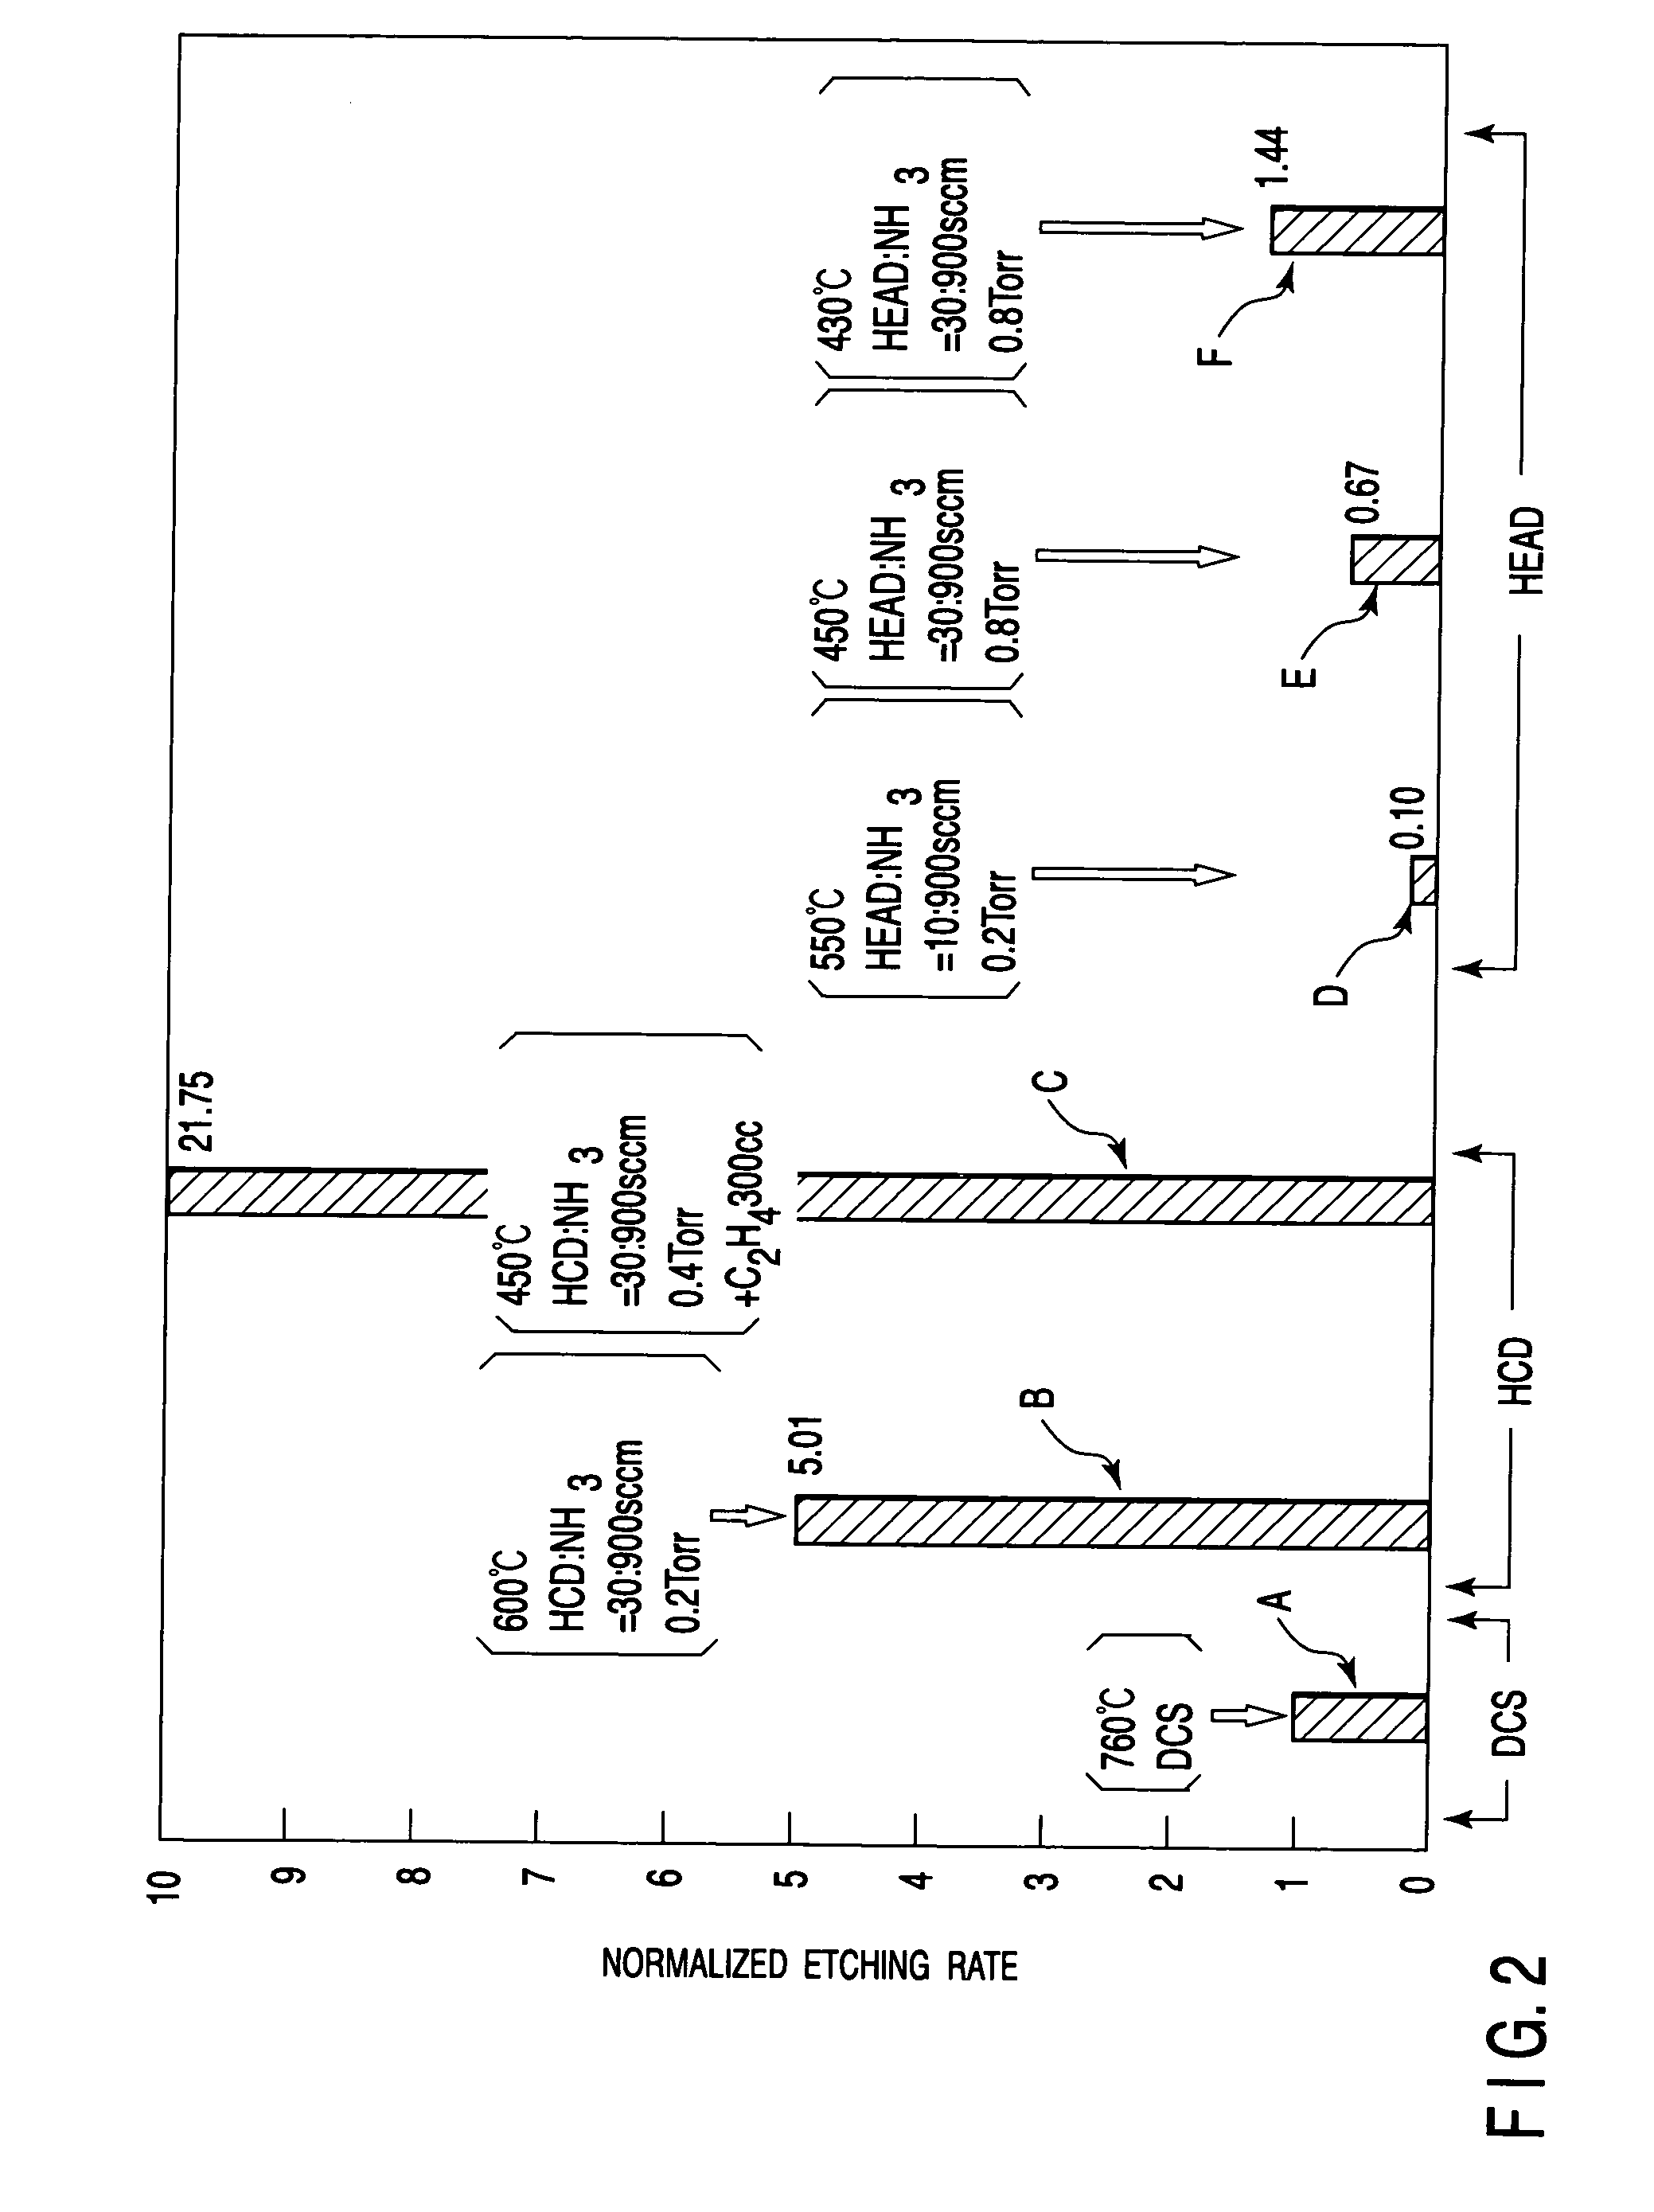 Method of CVD for forming silicon nitride film on substrate